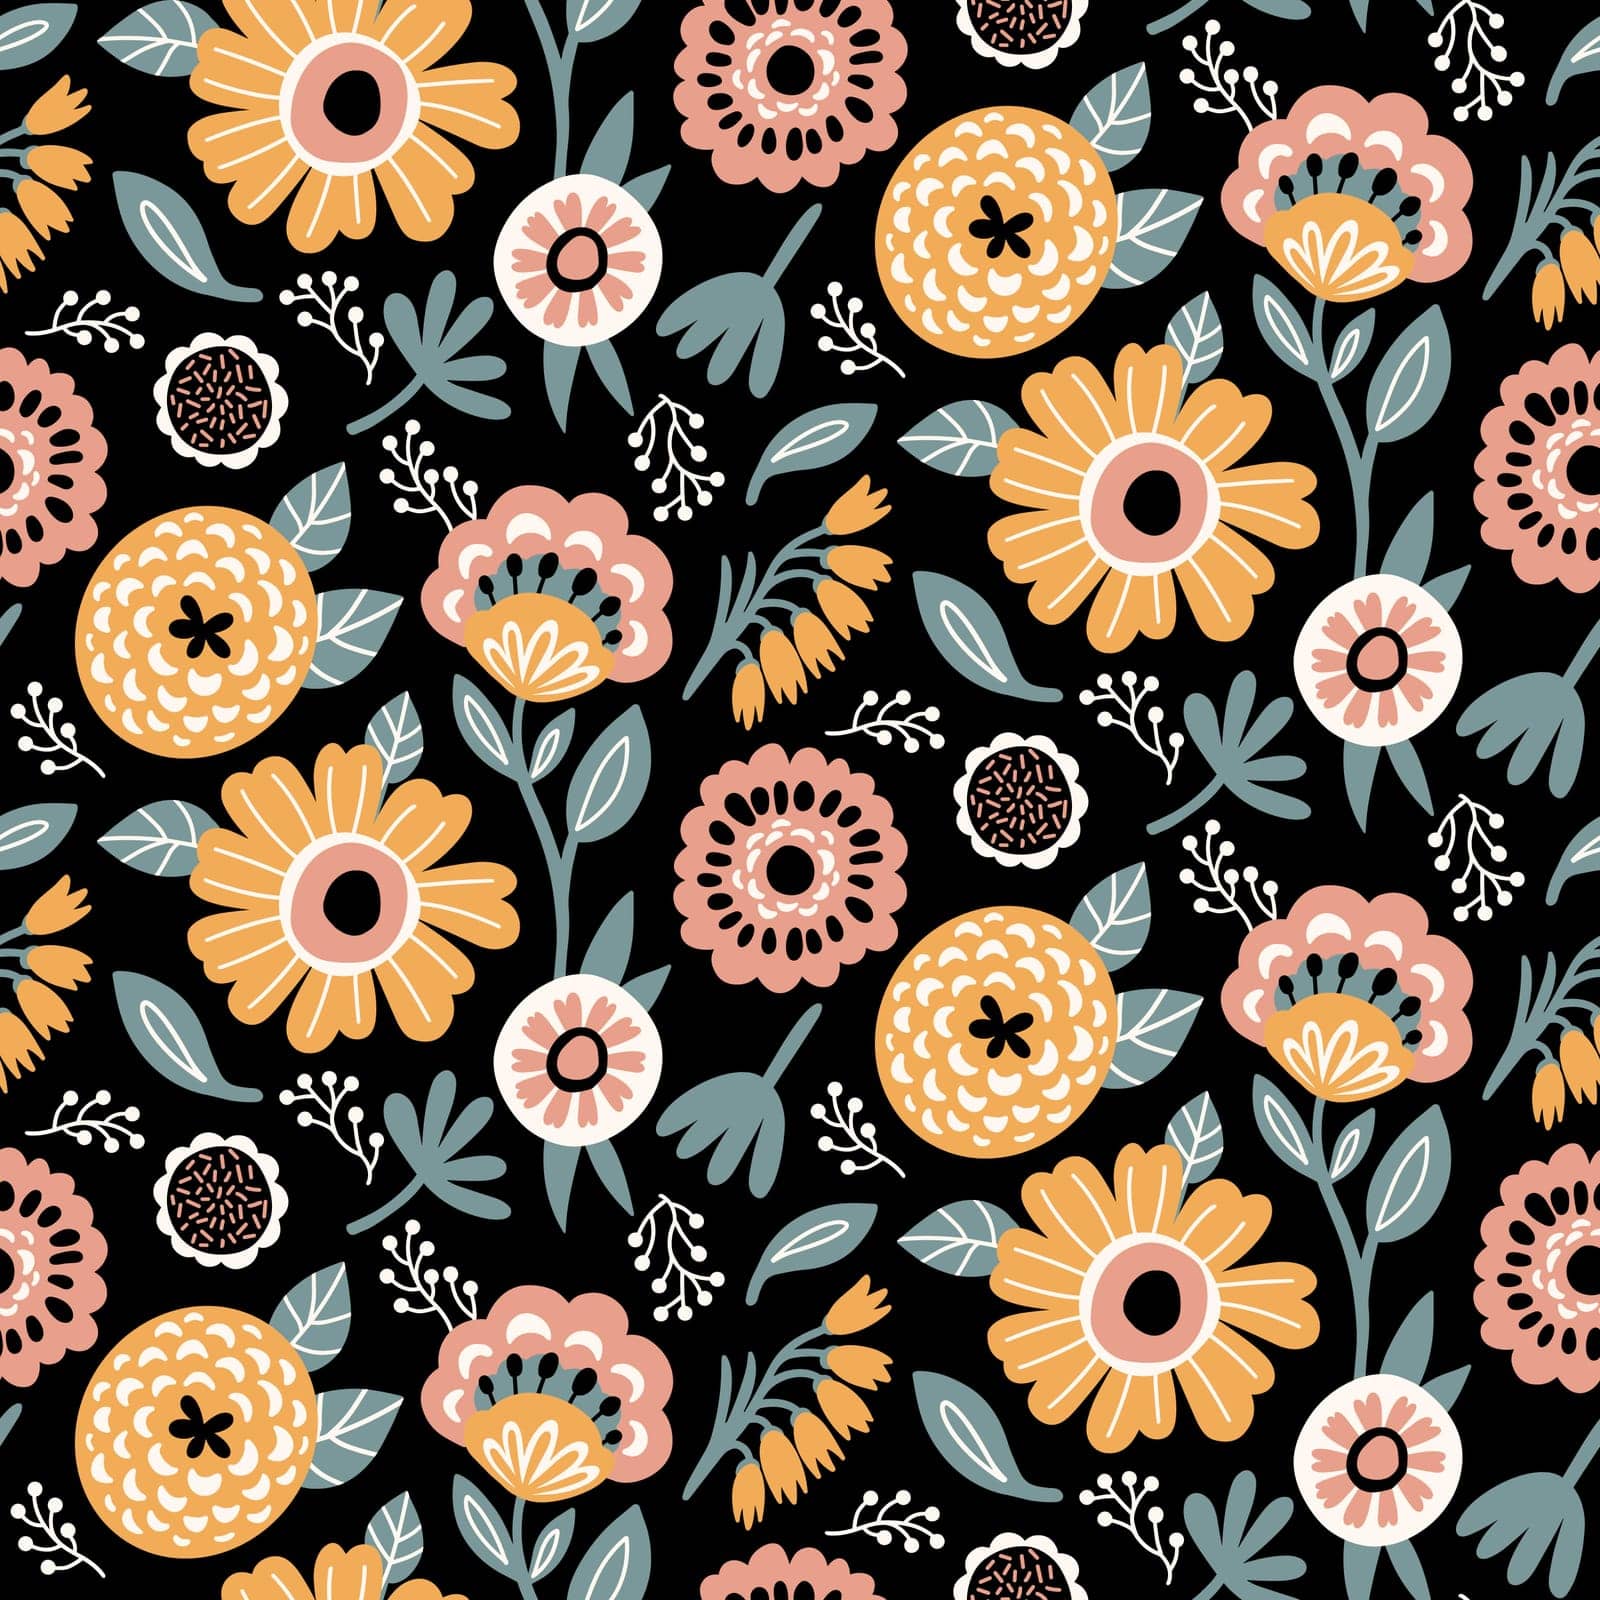 Floral Seamless Pattern of Flowers and Leaves in Yellow, White, Pink Peach, Grey Green on Black by LanaLeta